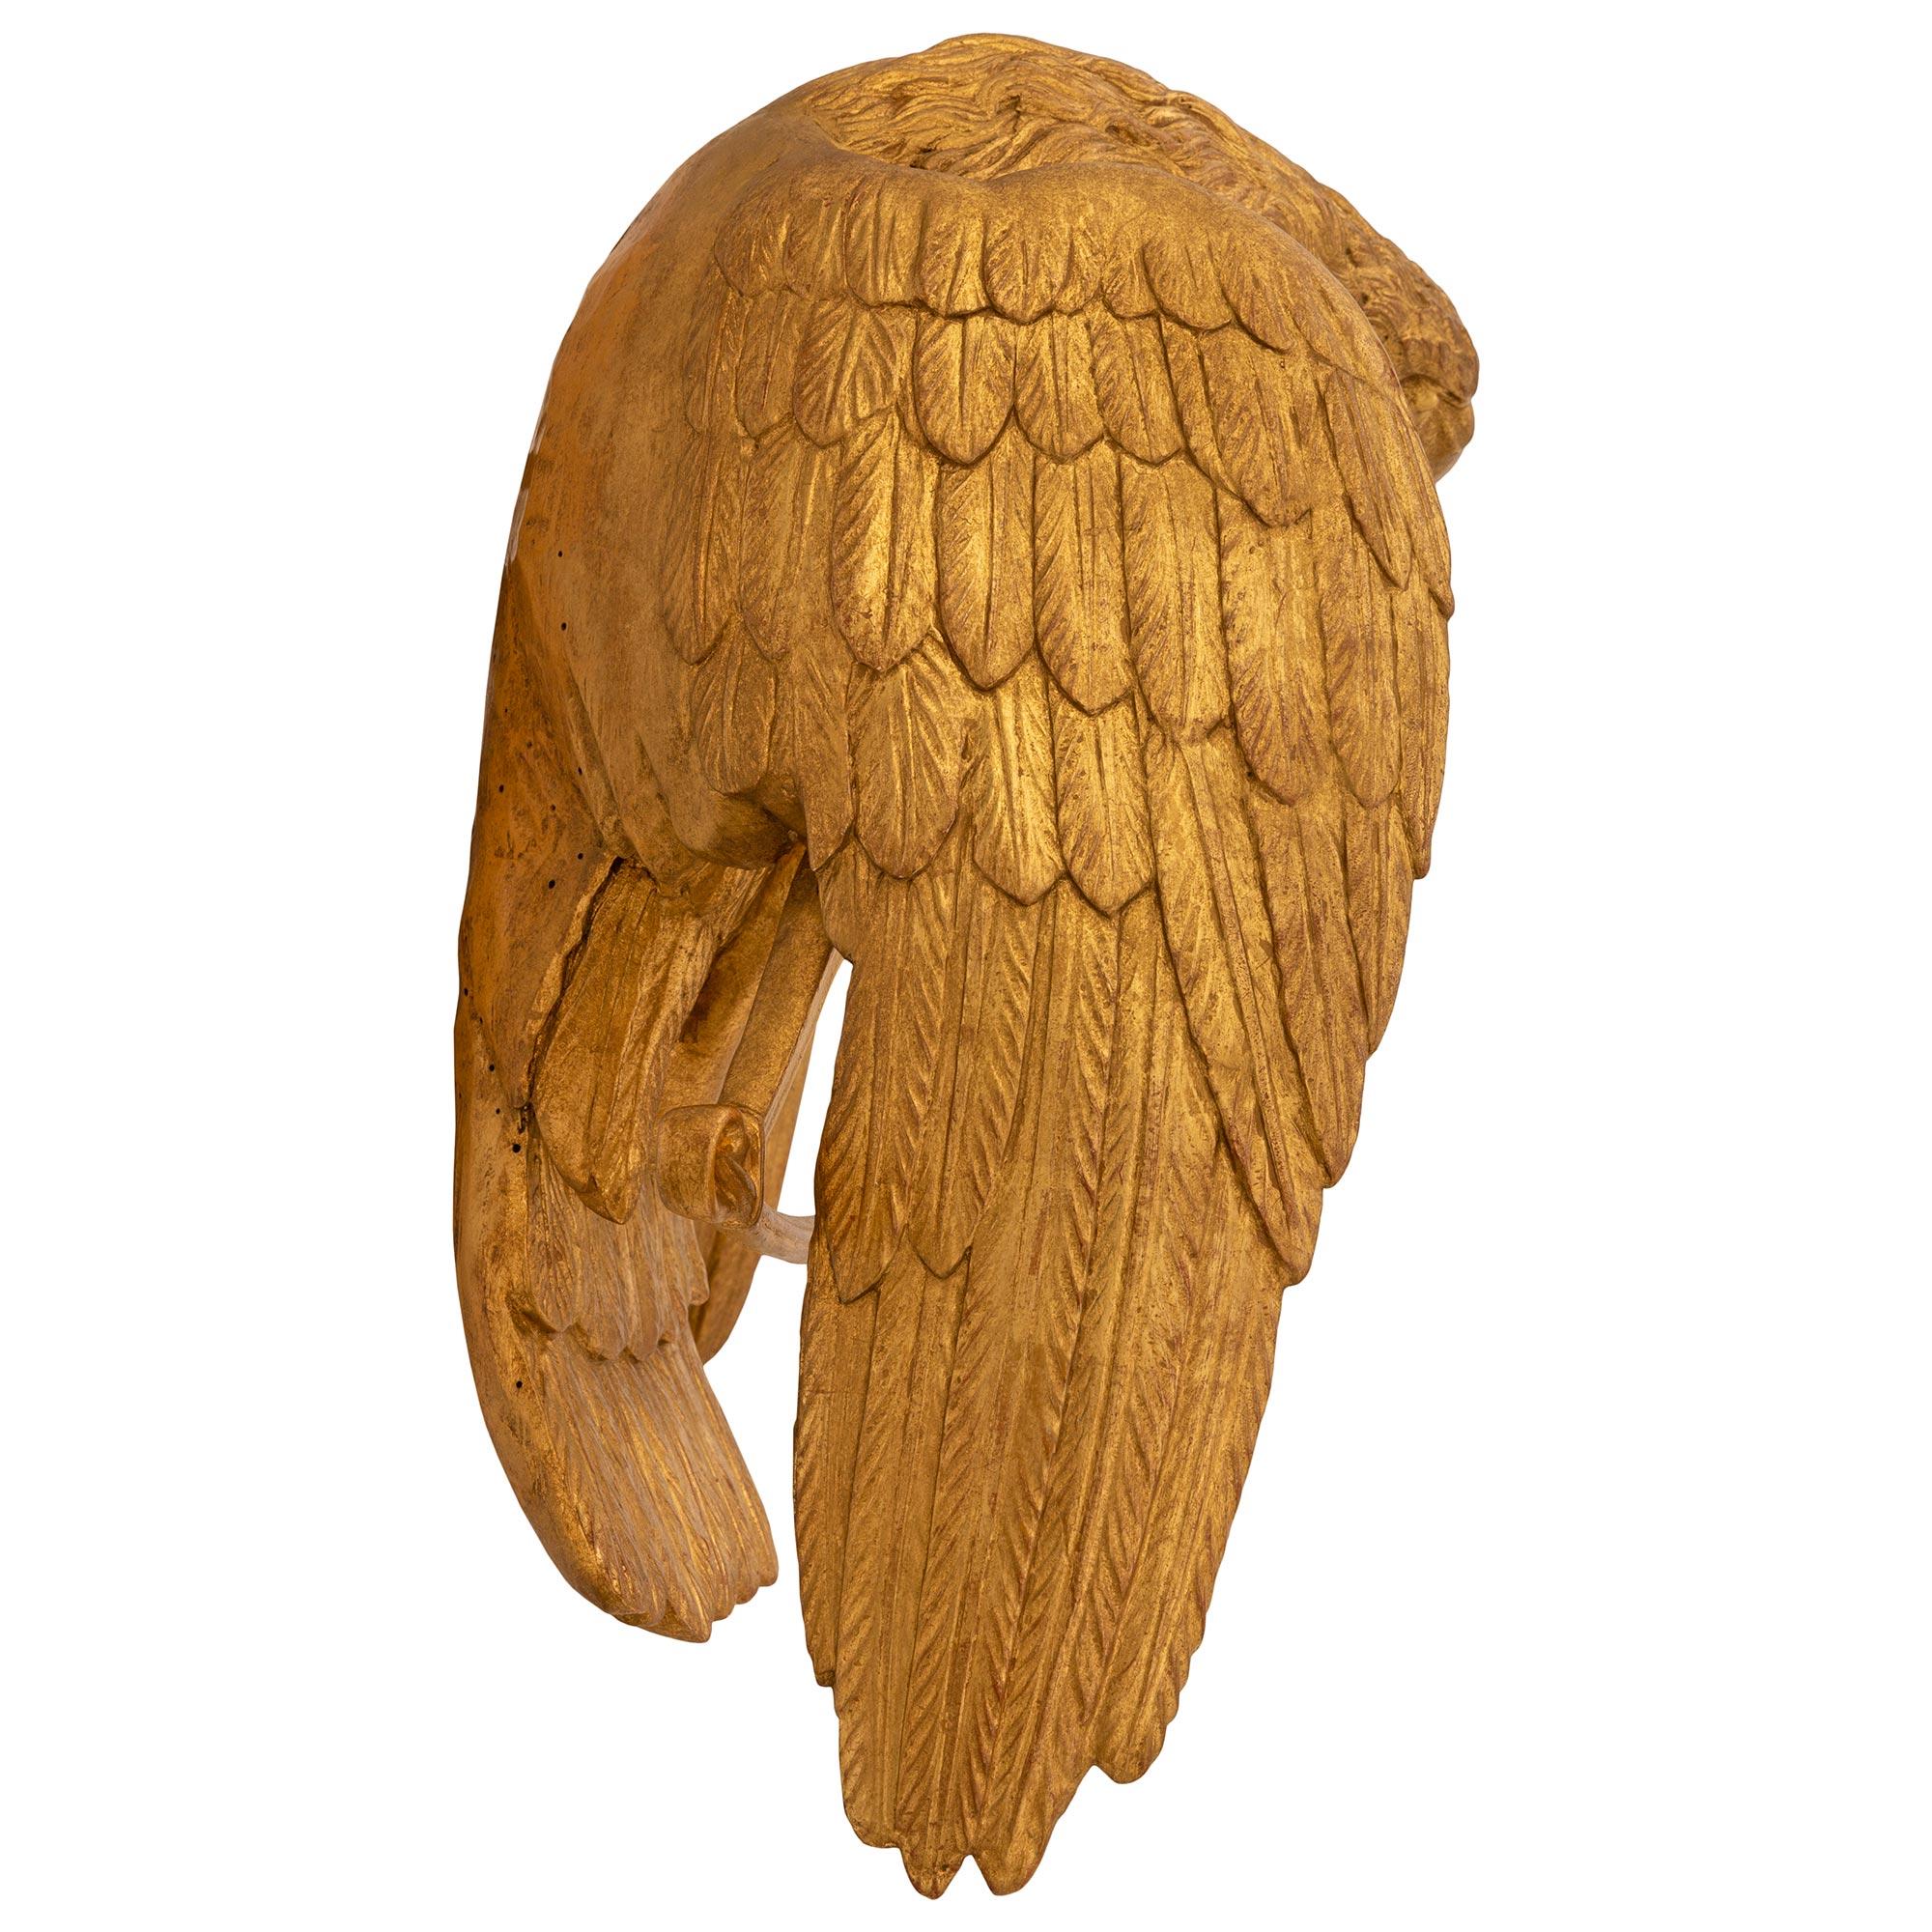 Italian Early 19th Century 1st Empire Period Giltwood Eagle Wall Decor For Sale 1